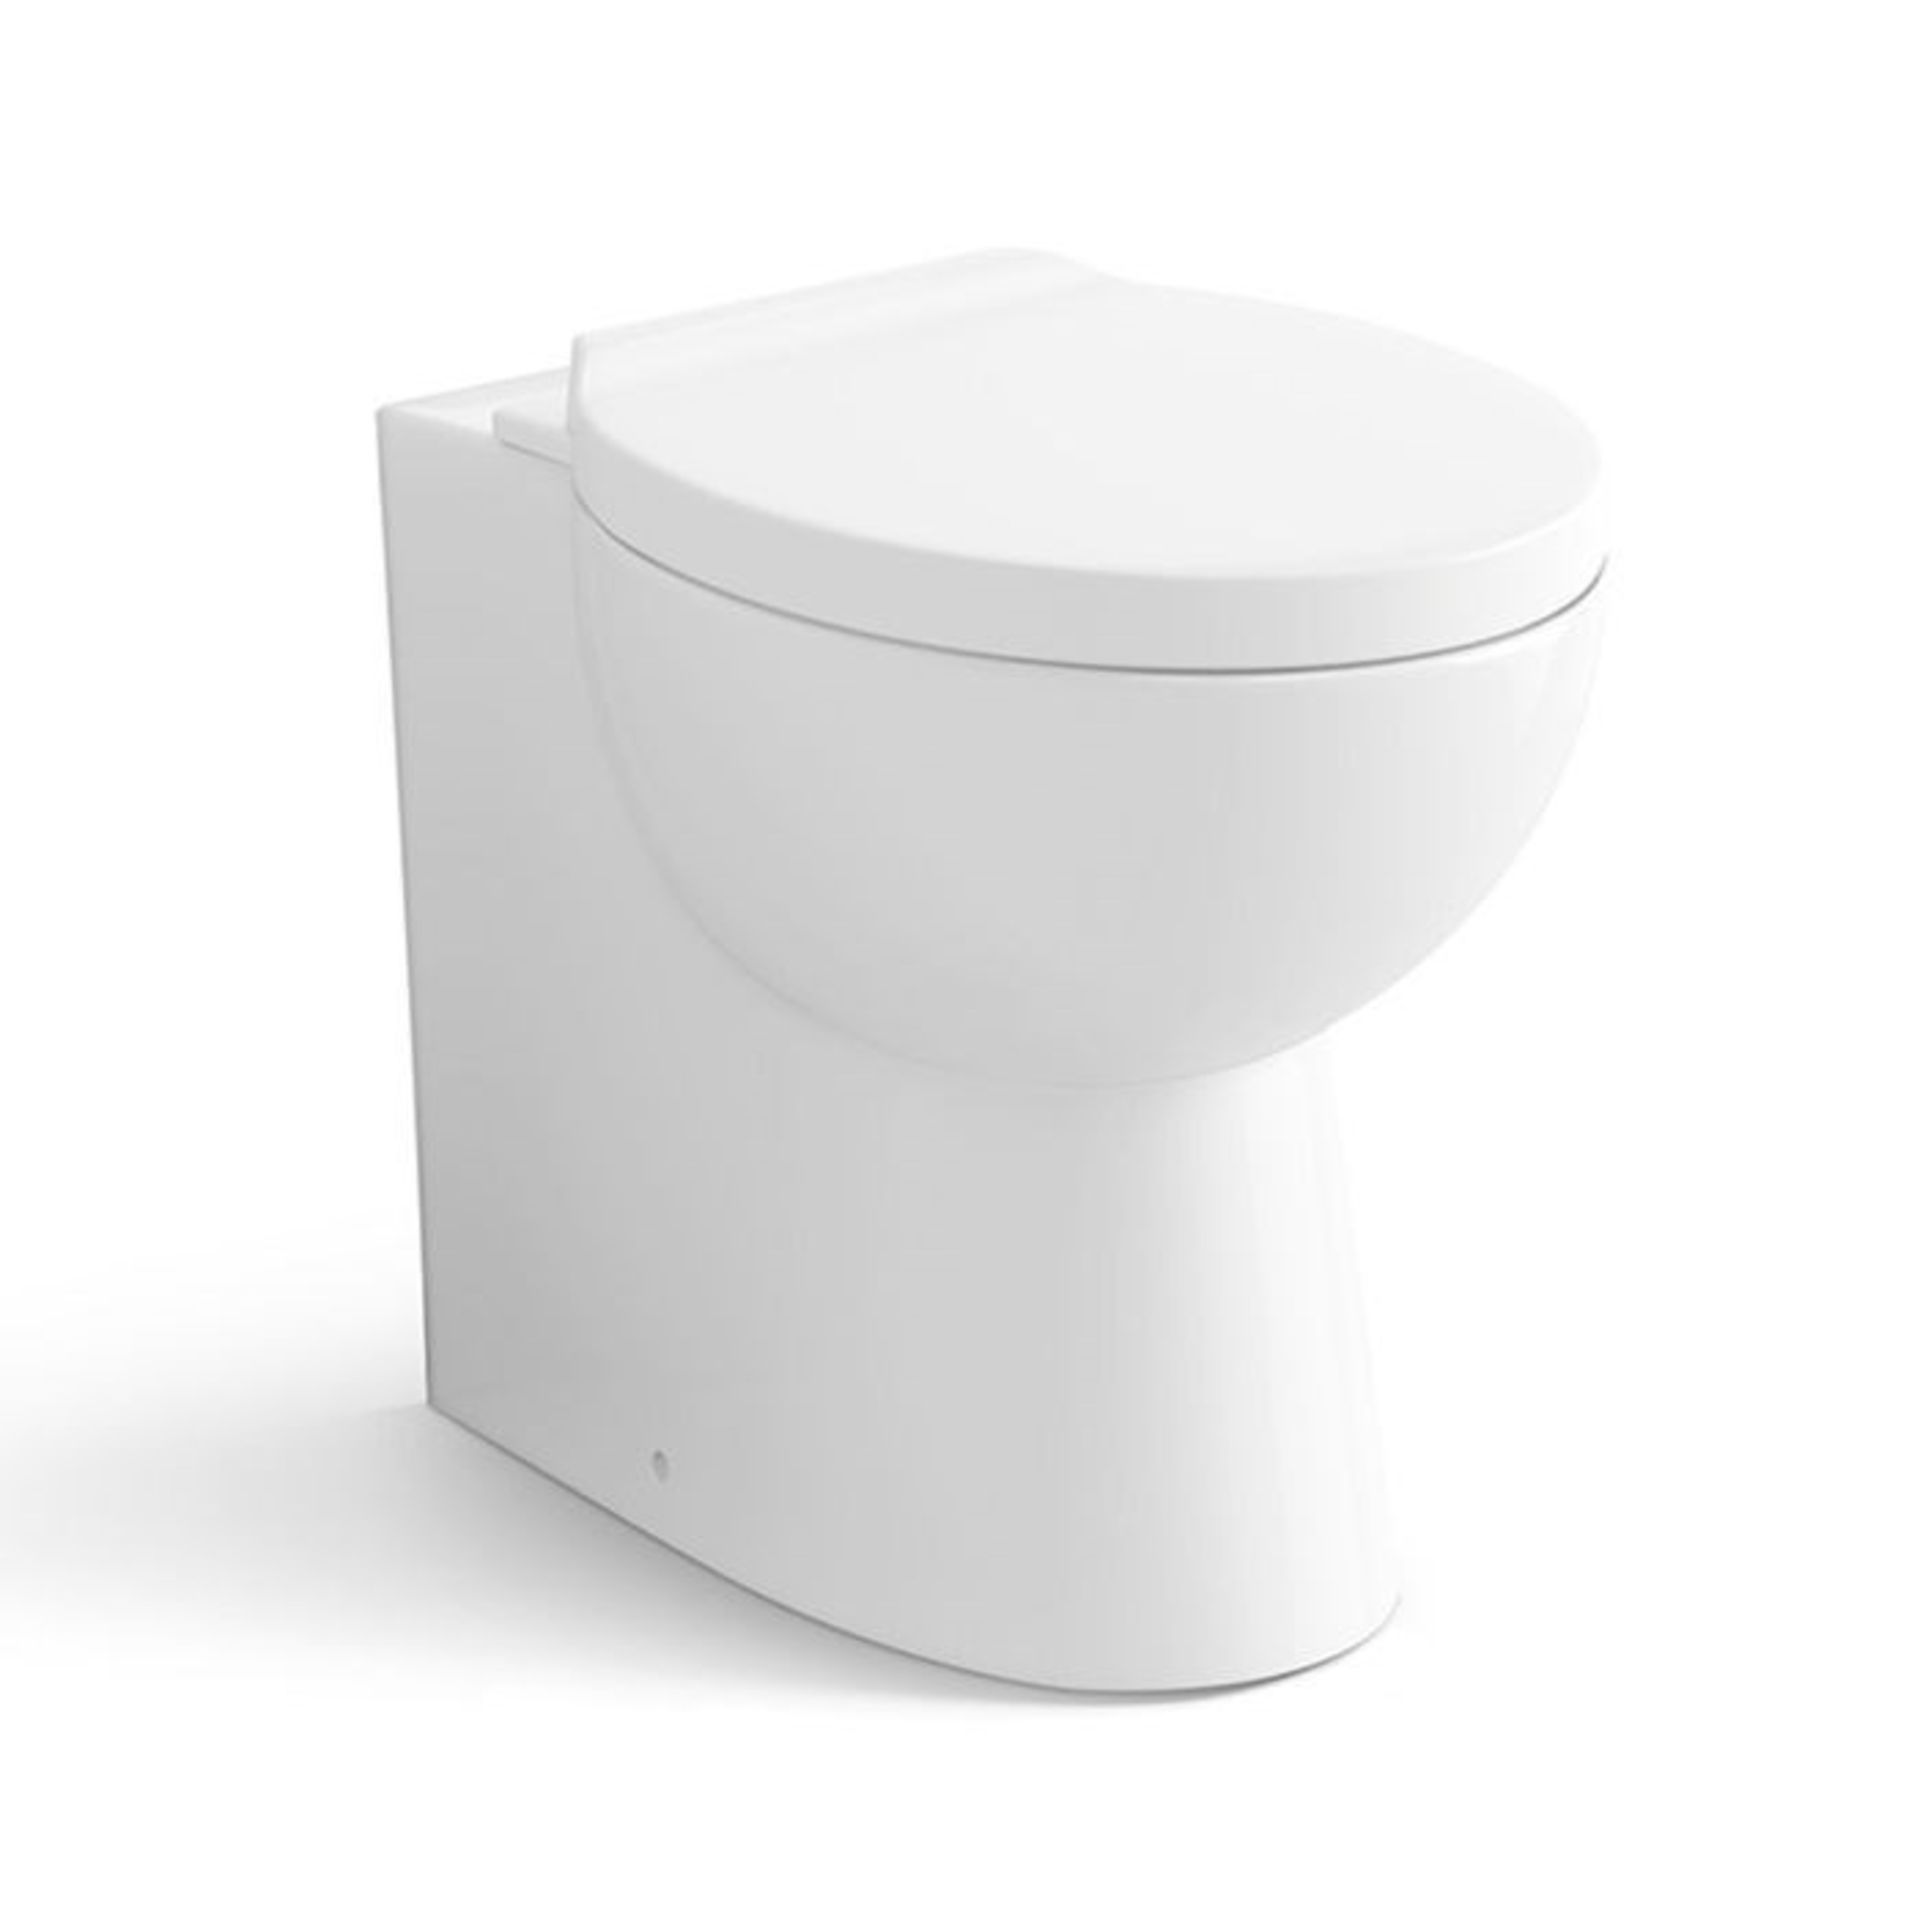 Quartz Back to Wall Toilet.Stylish design Made from White Vitreous China Finished in a high glo... - Image 2 of 2